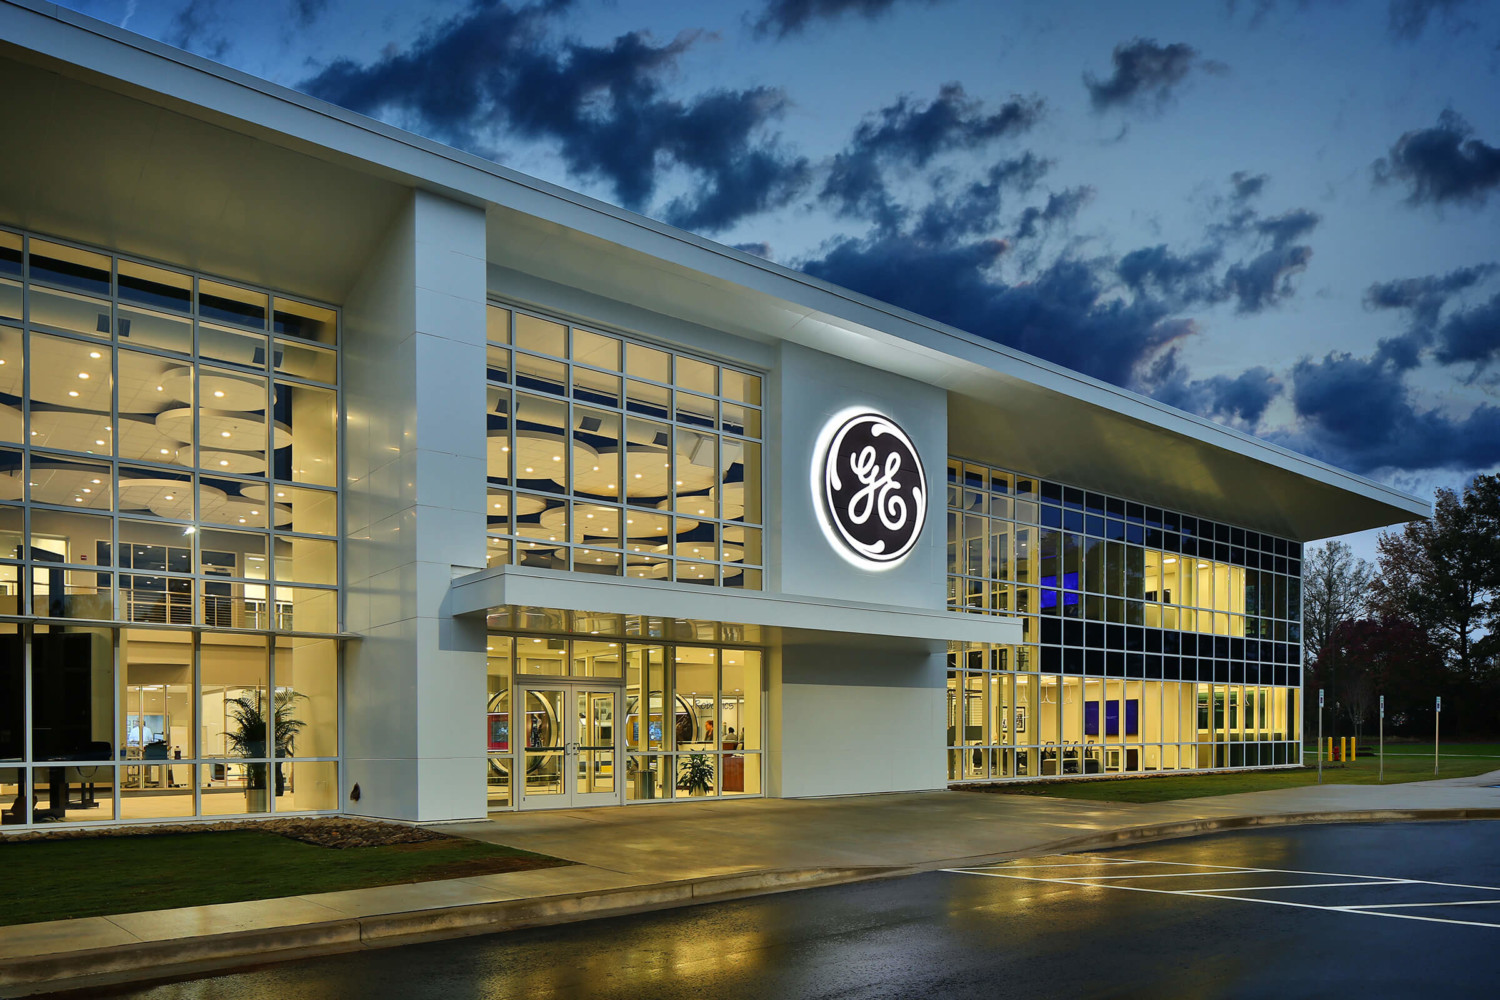 Outside view at night of GE Power's Advanced Manufacturing Works facility in Greenville.